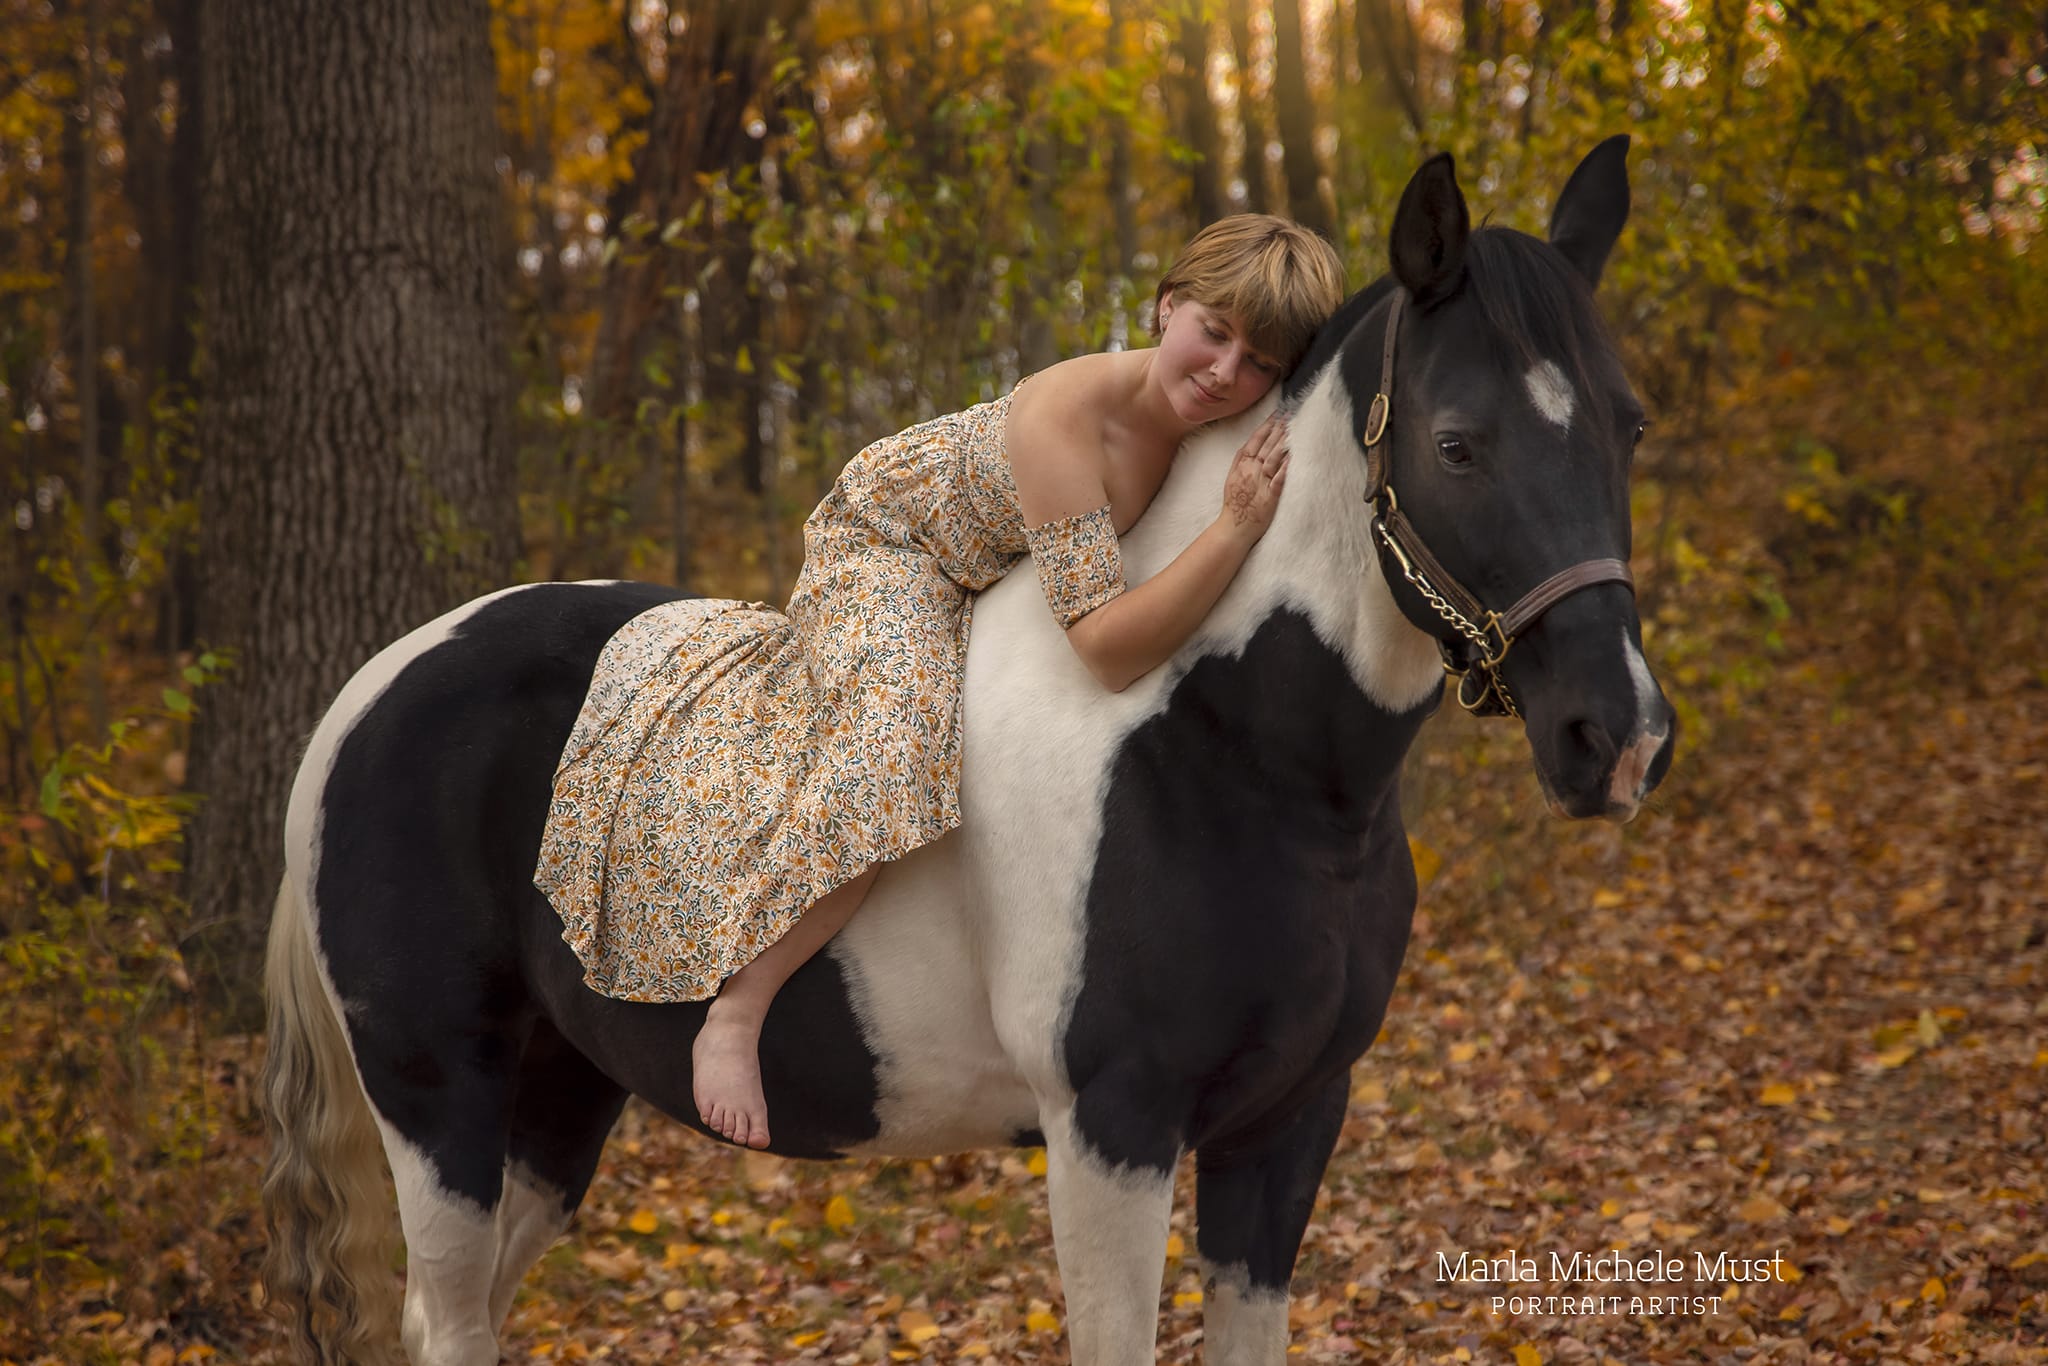 A tender moment in autumn captured by a Detroit equine photographer, conveying a woman lounging on her horse's back amidst a forest and bed of orange leaves.